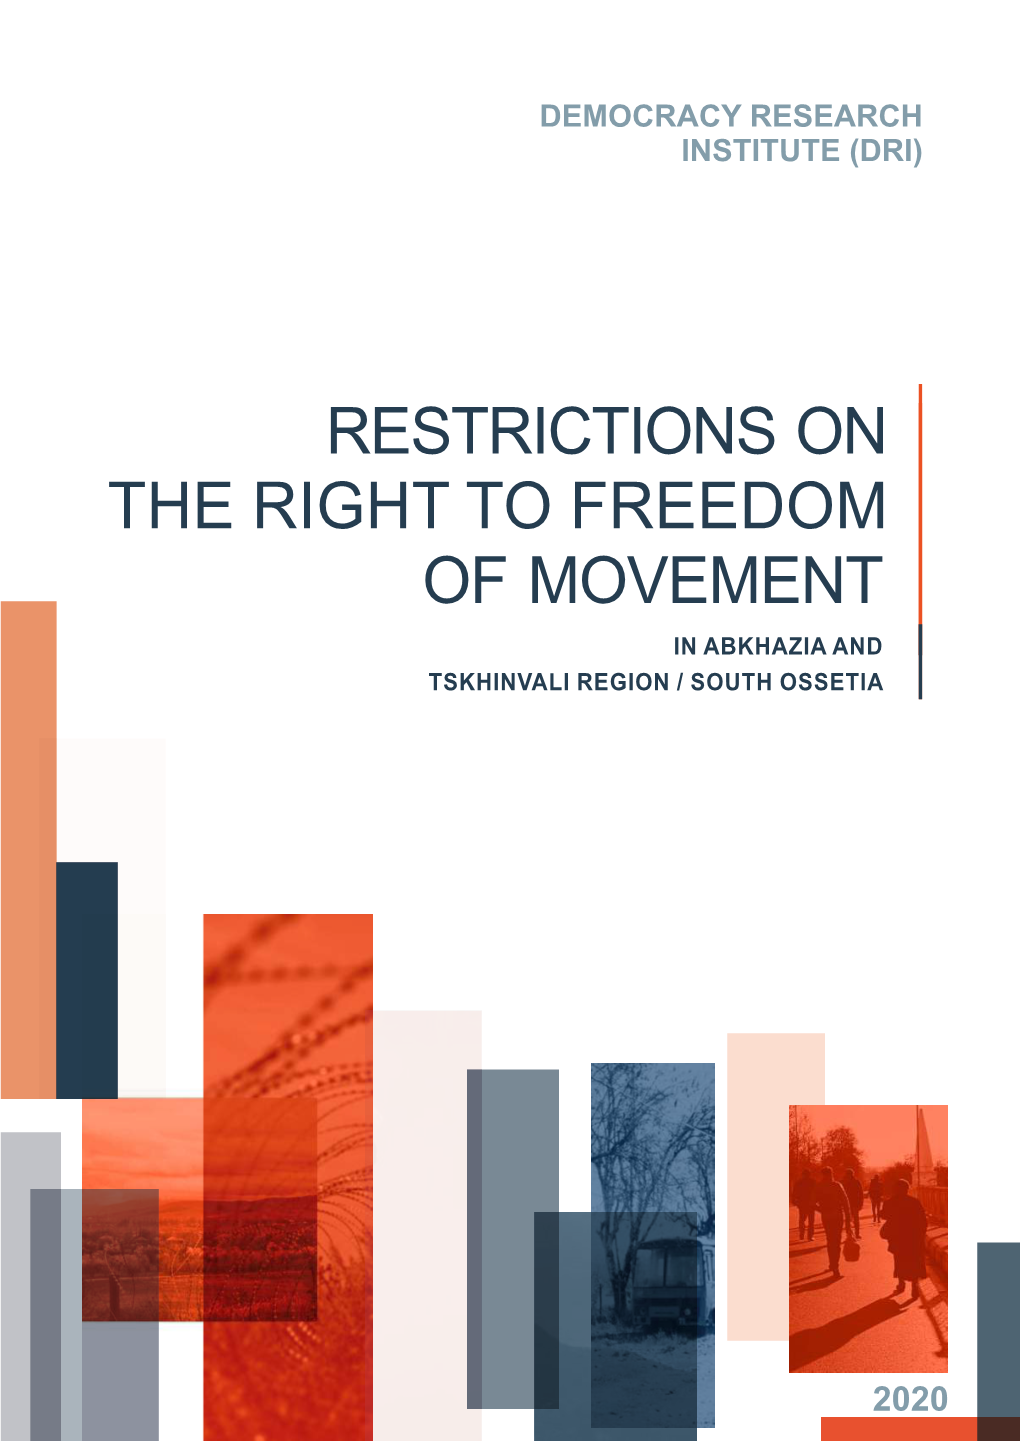 Restrictions on the Right to Freedom of Movement in Abkhazia and Tskhinvali Region / South Ossetia